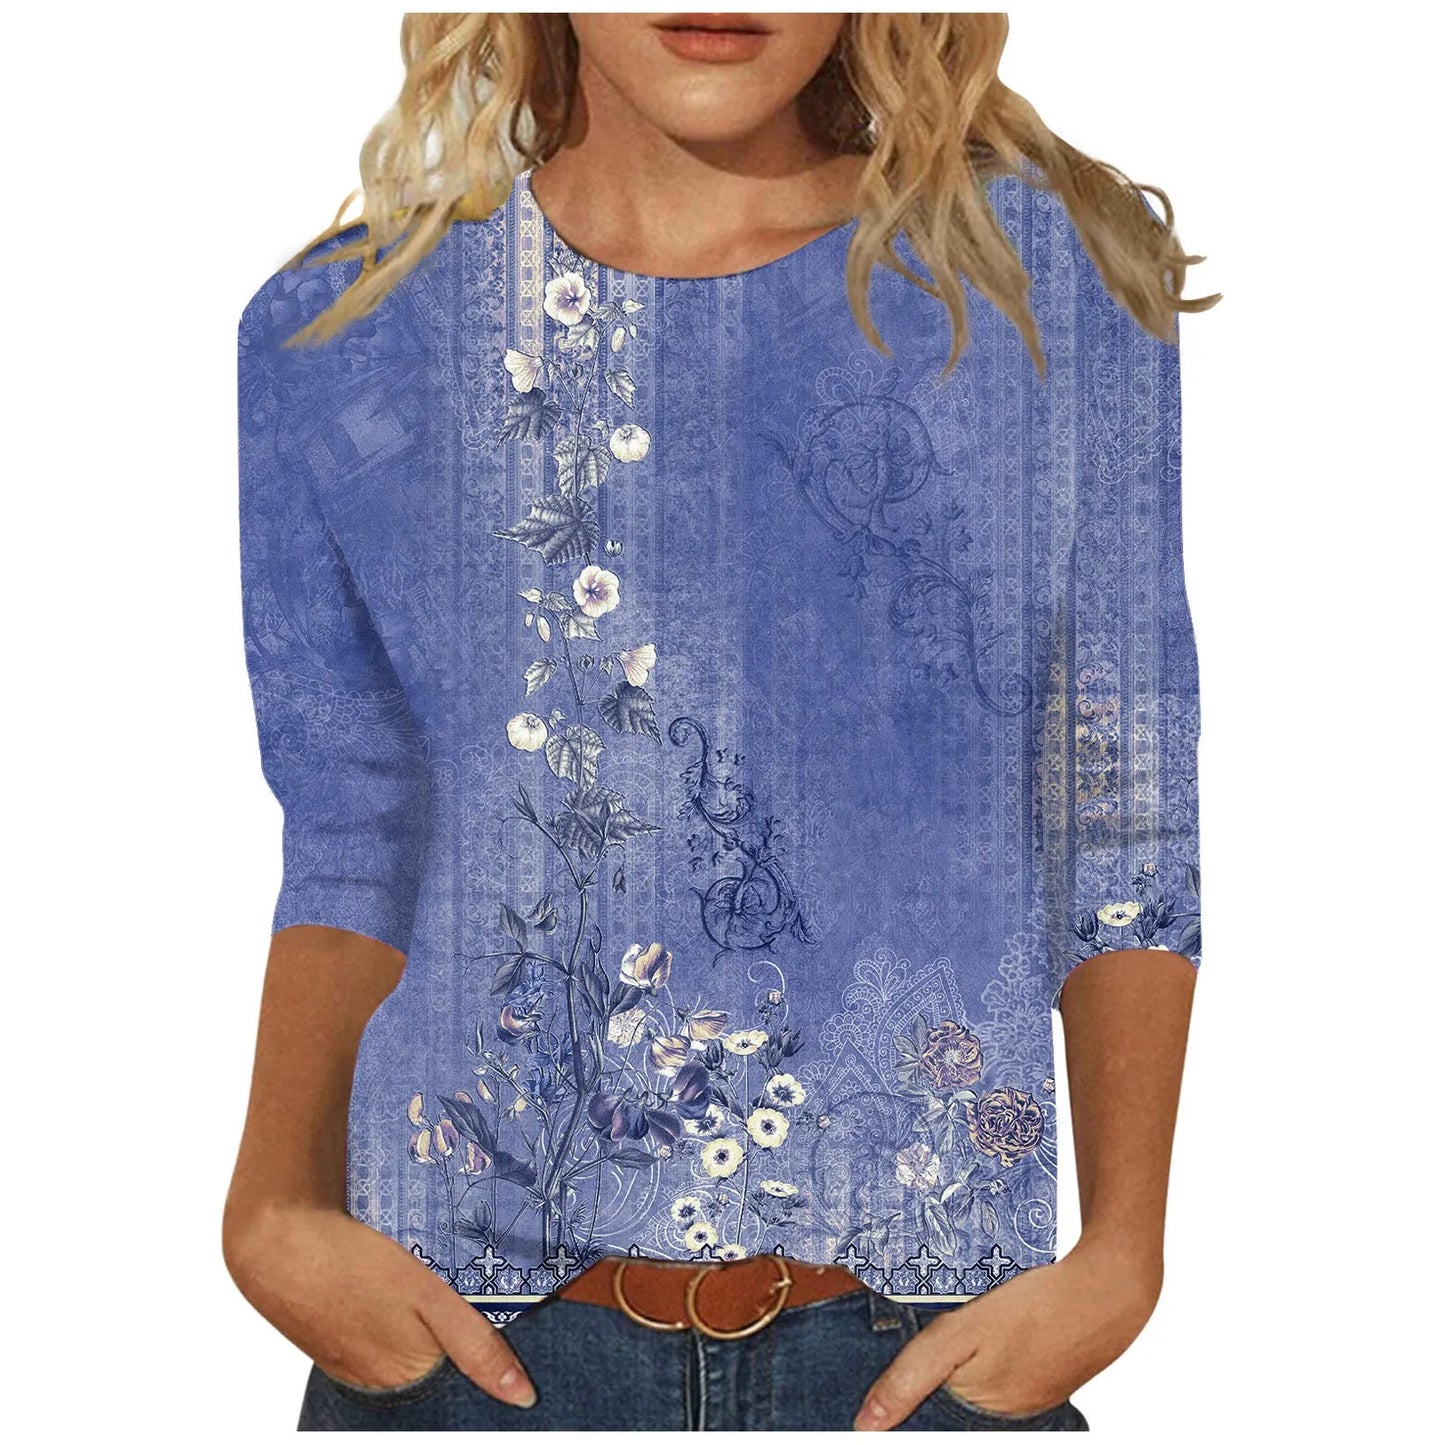 Women Cute Print Graphic Tees Blouses Casual Plus Size